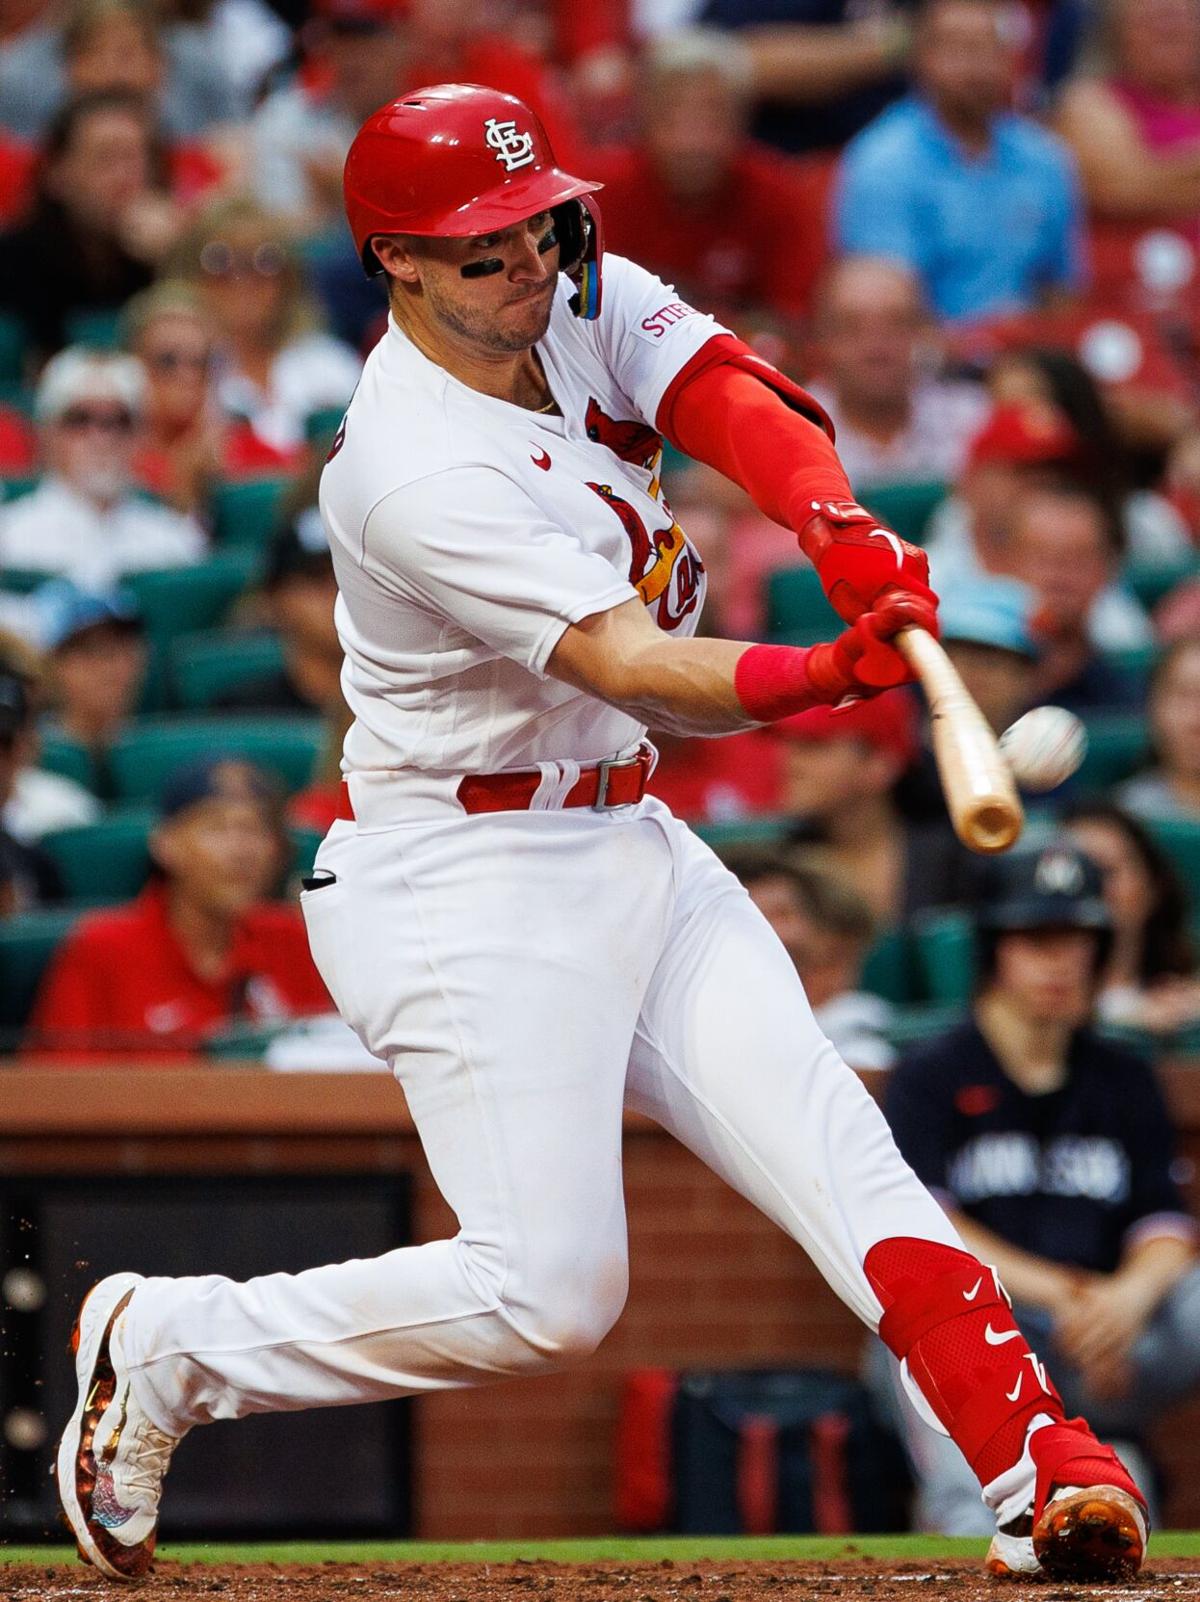 Cardinals: Andrew Knizner coming into his own as backup catcher